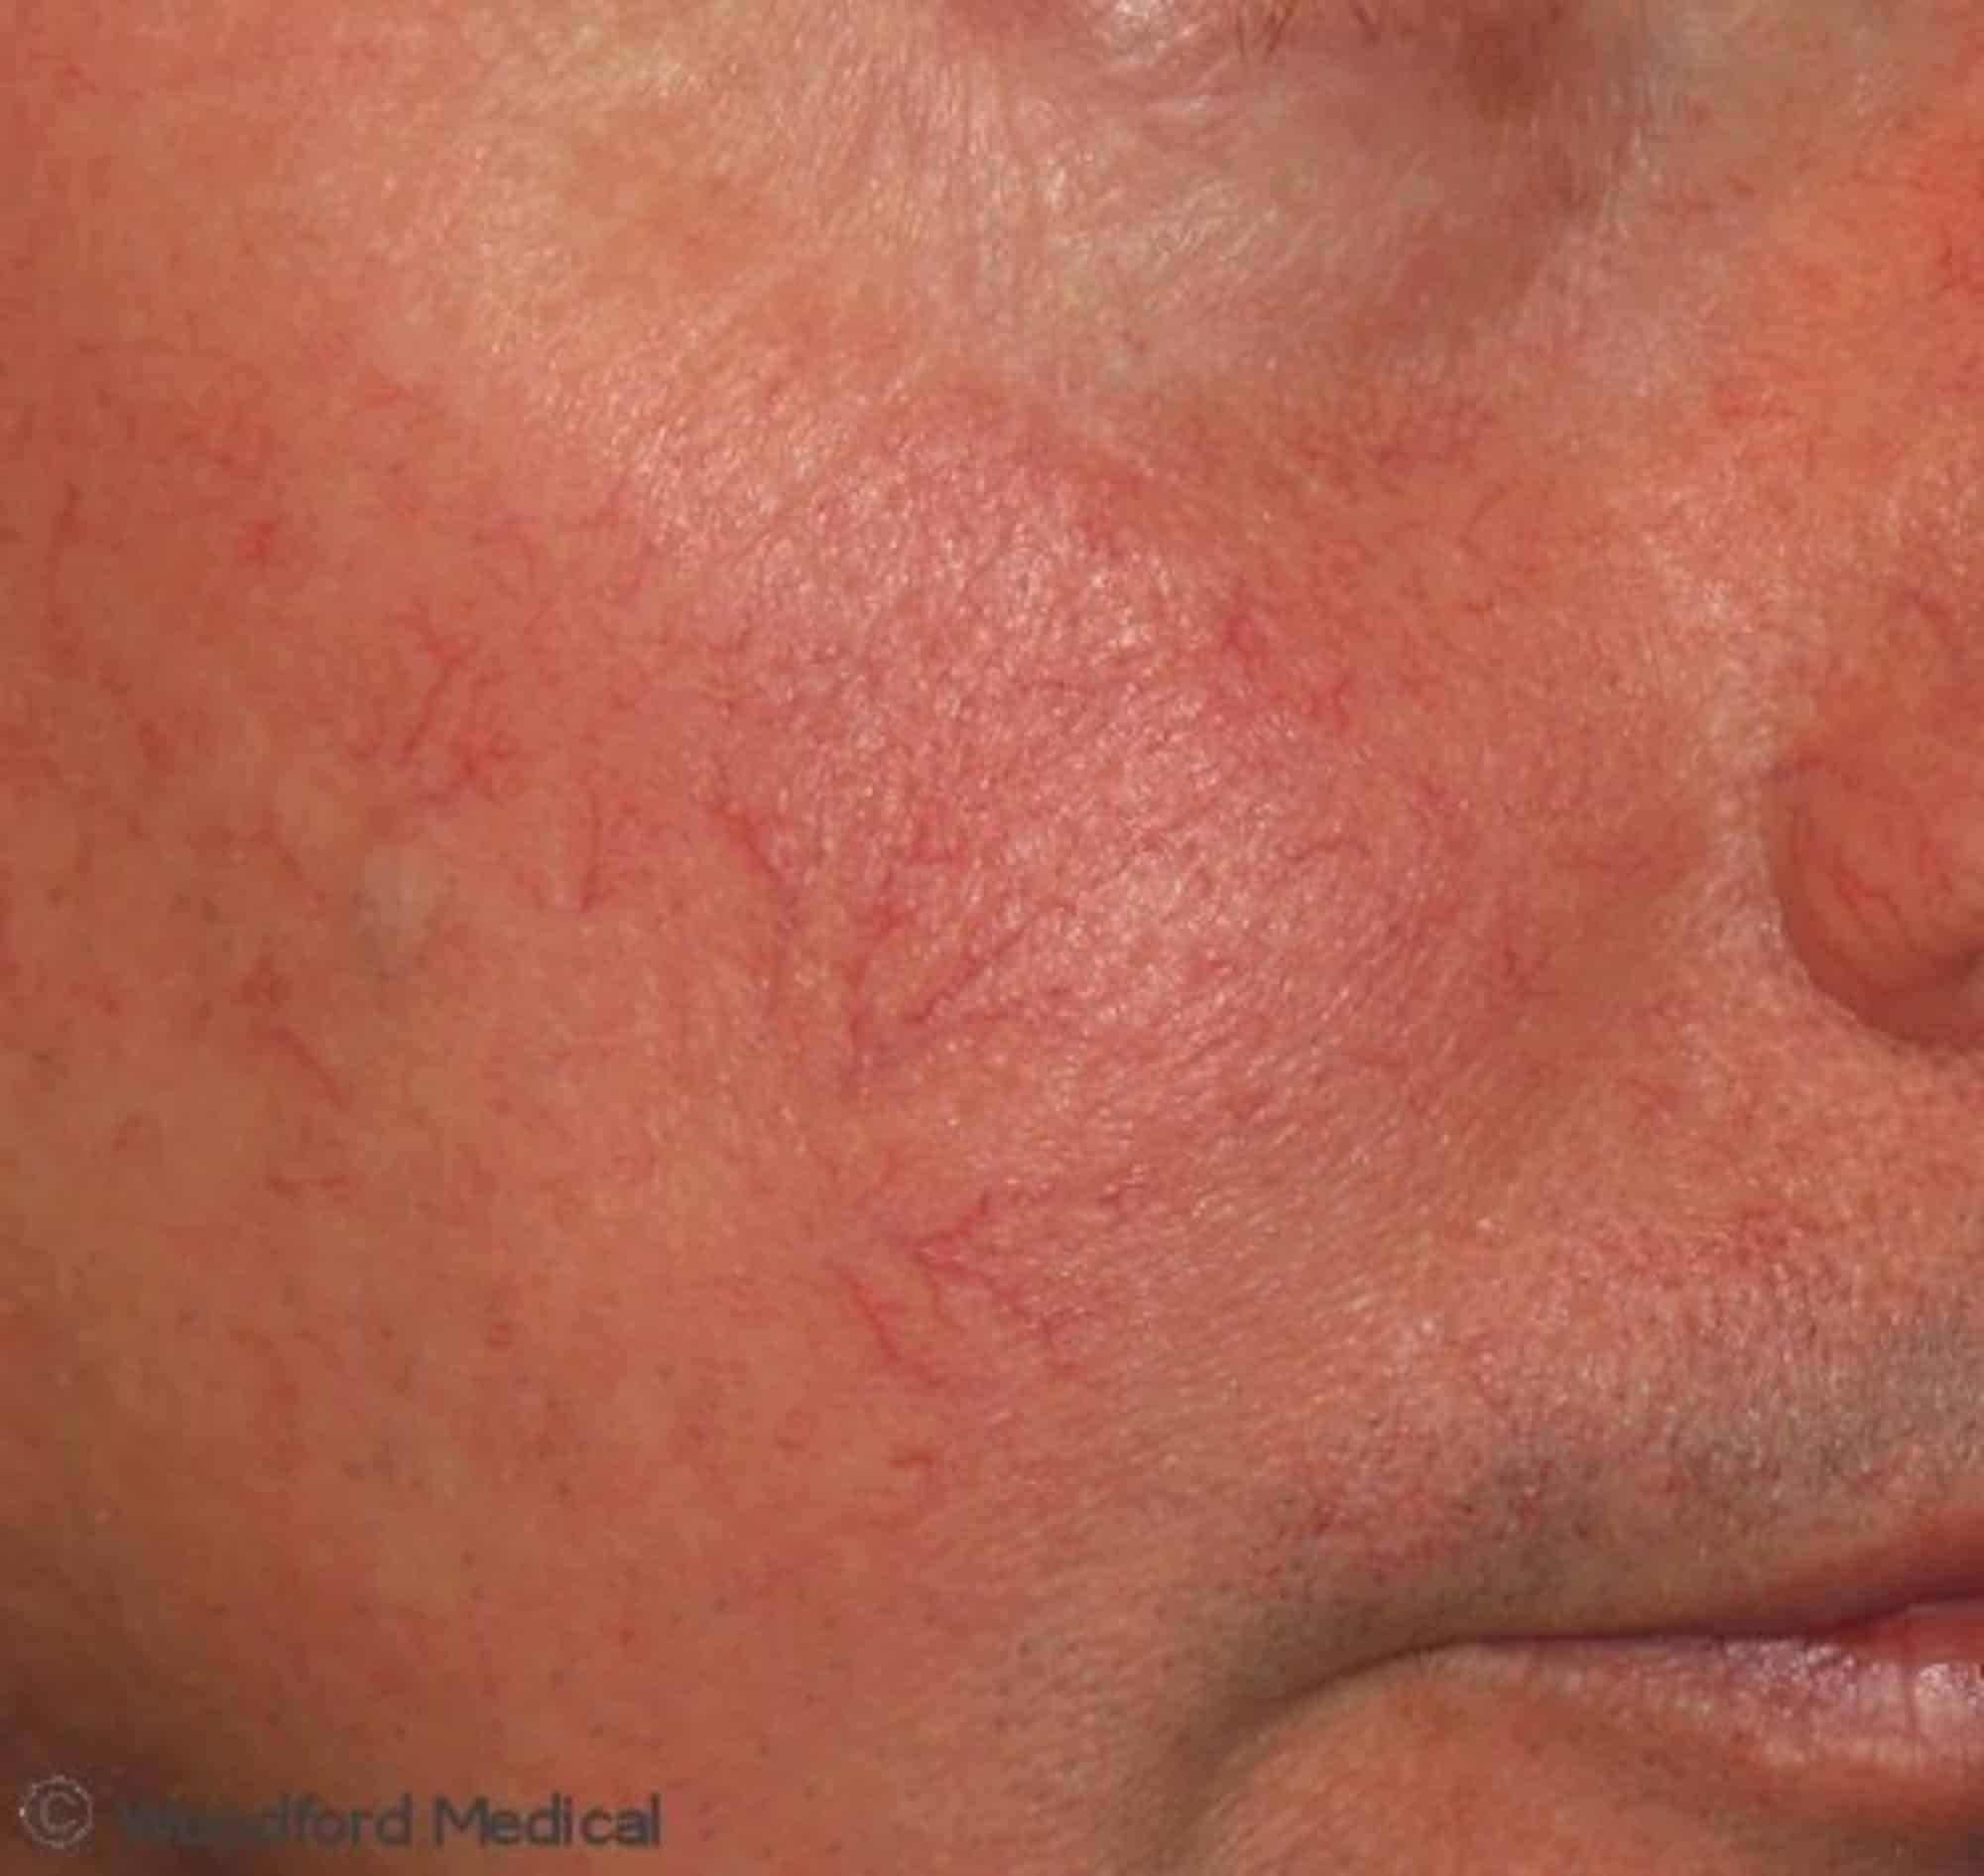 Facial Redness, Rosacea And Blushing